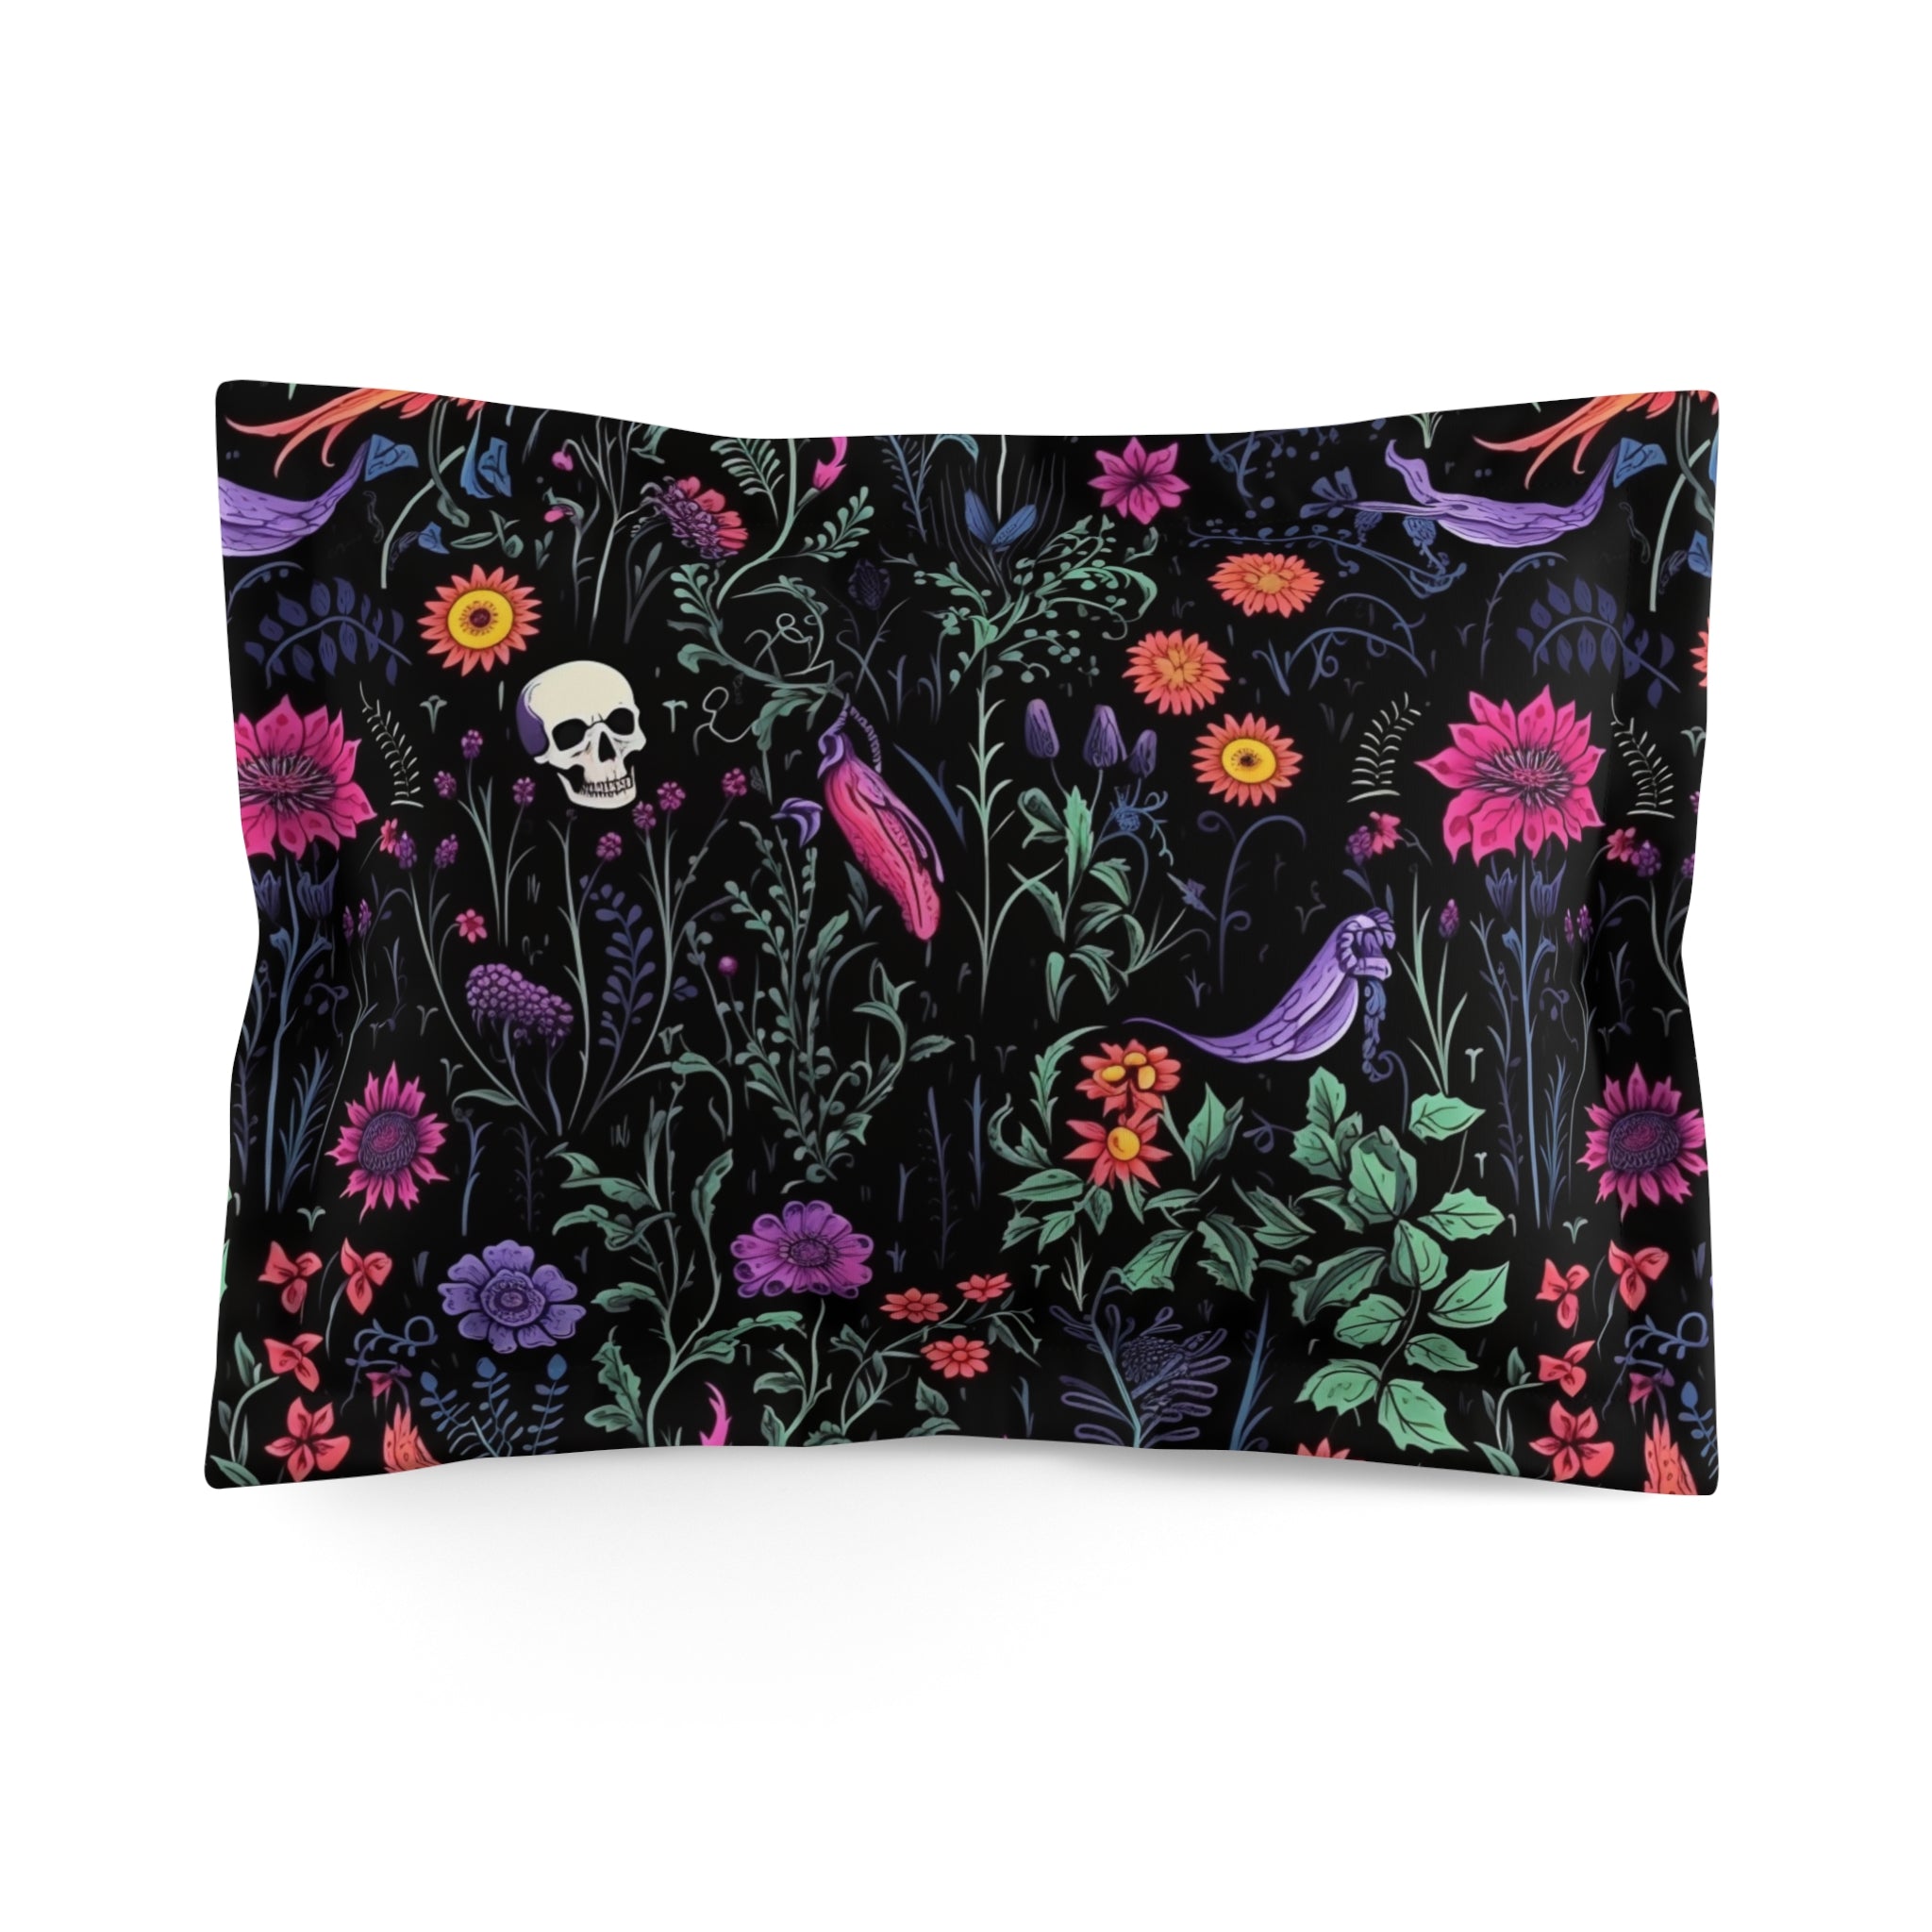 Pastel Gothic Damask Skulls Decorative Pillow Cover in Faux Suede